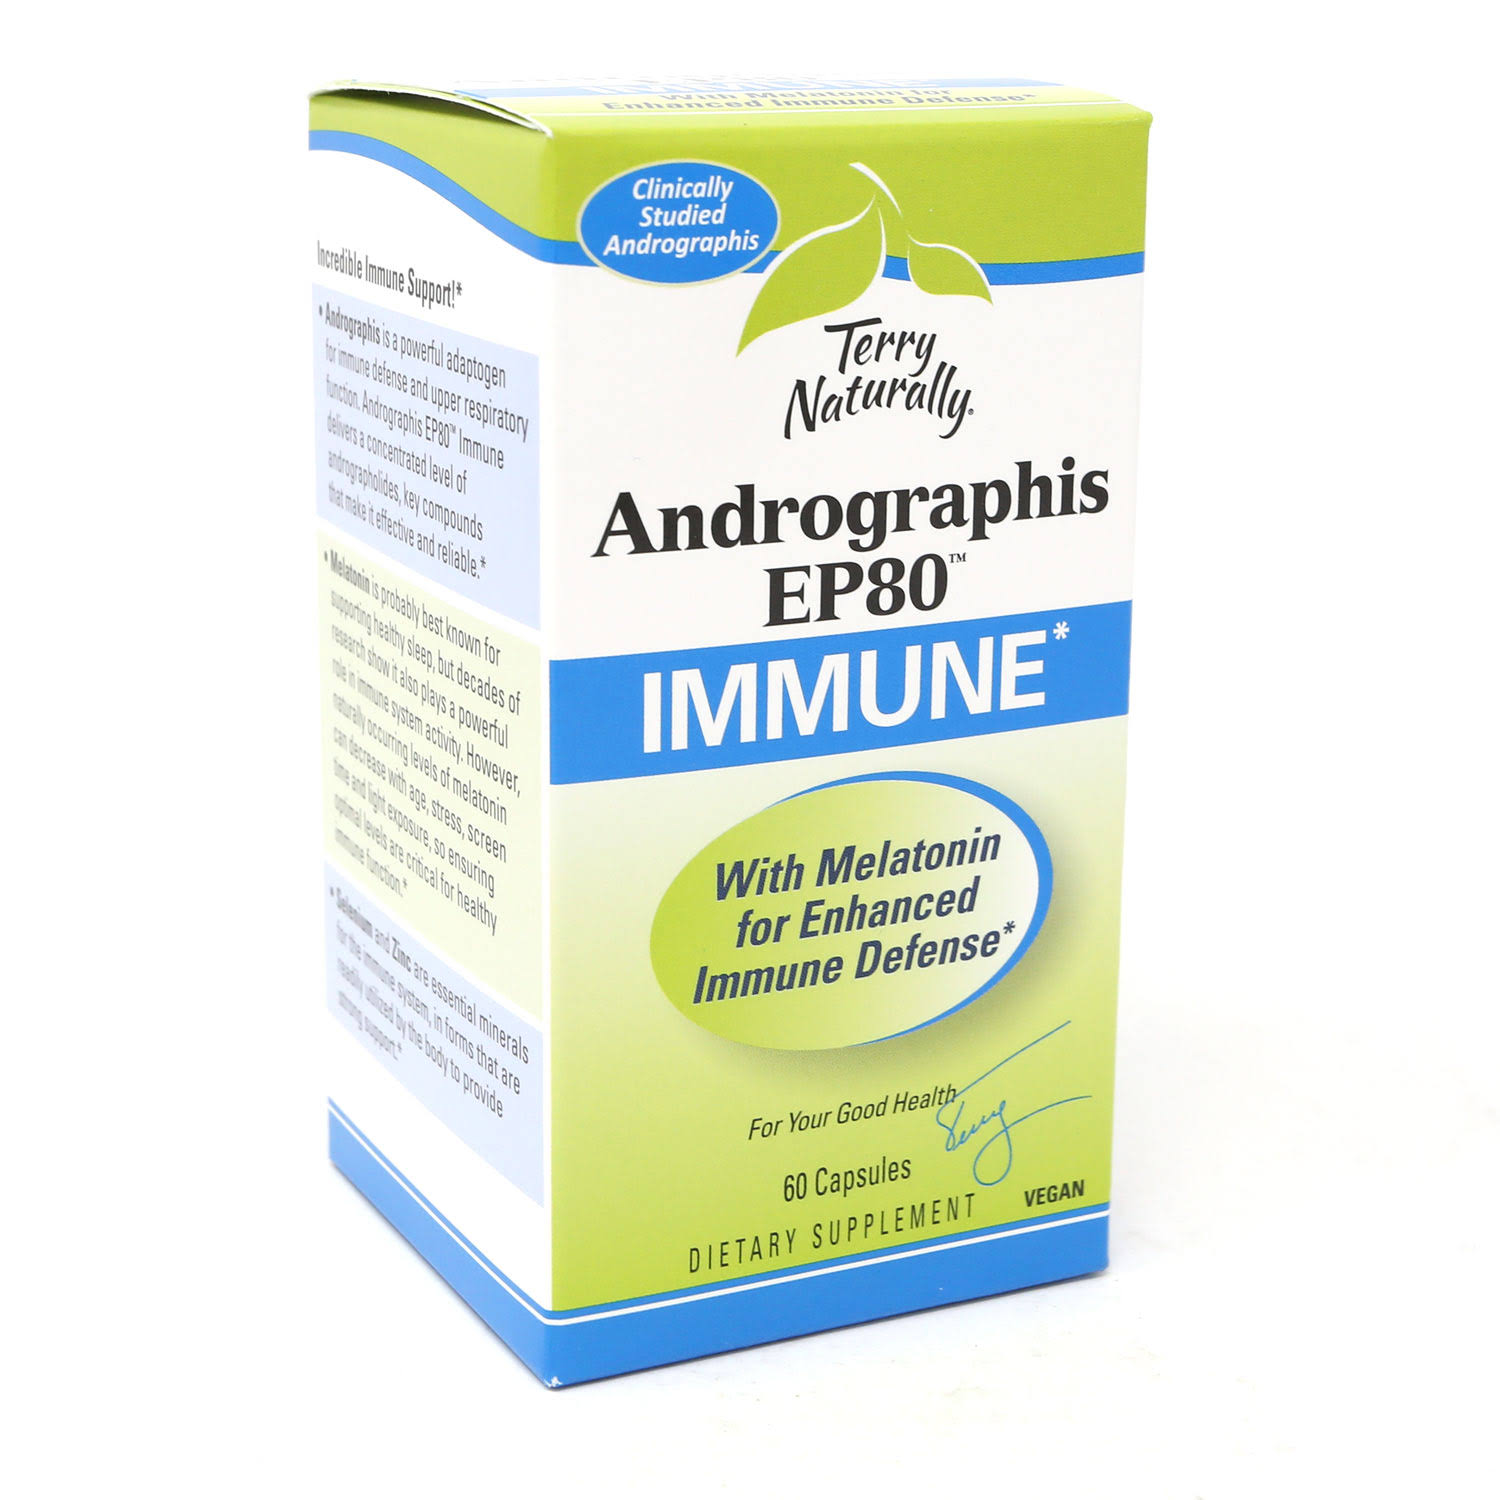 Terry Naturally Andrographis EP80 Immune Support - 60 Capsules